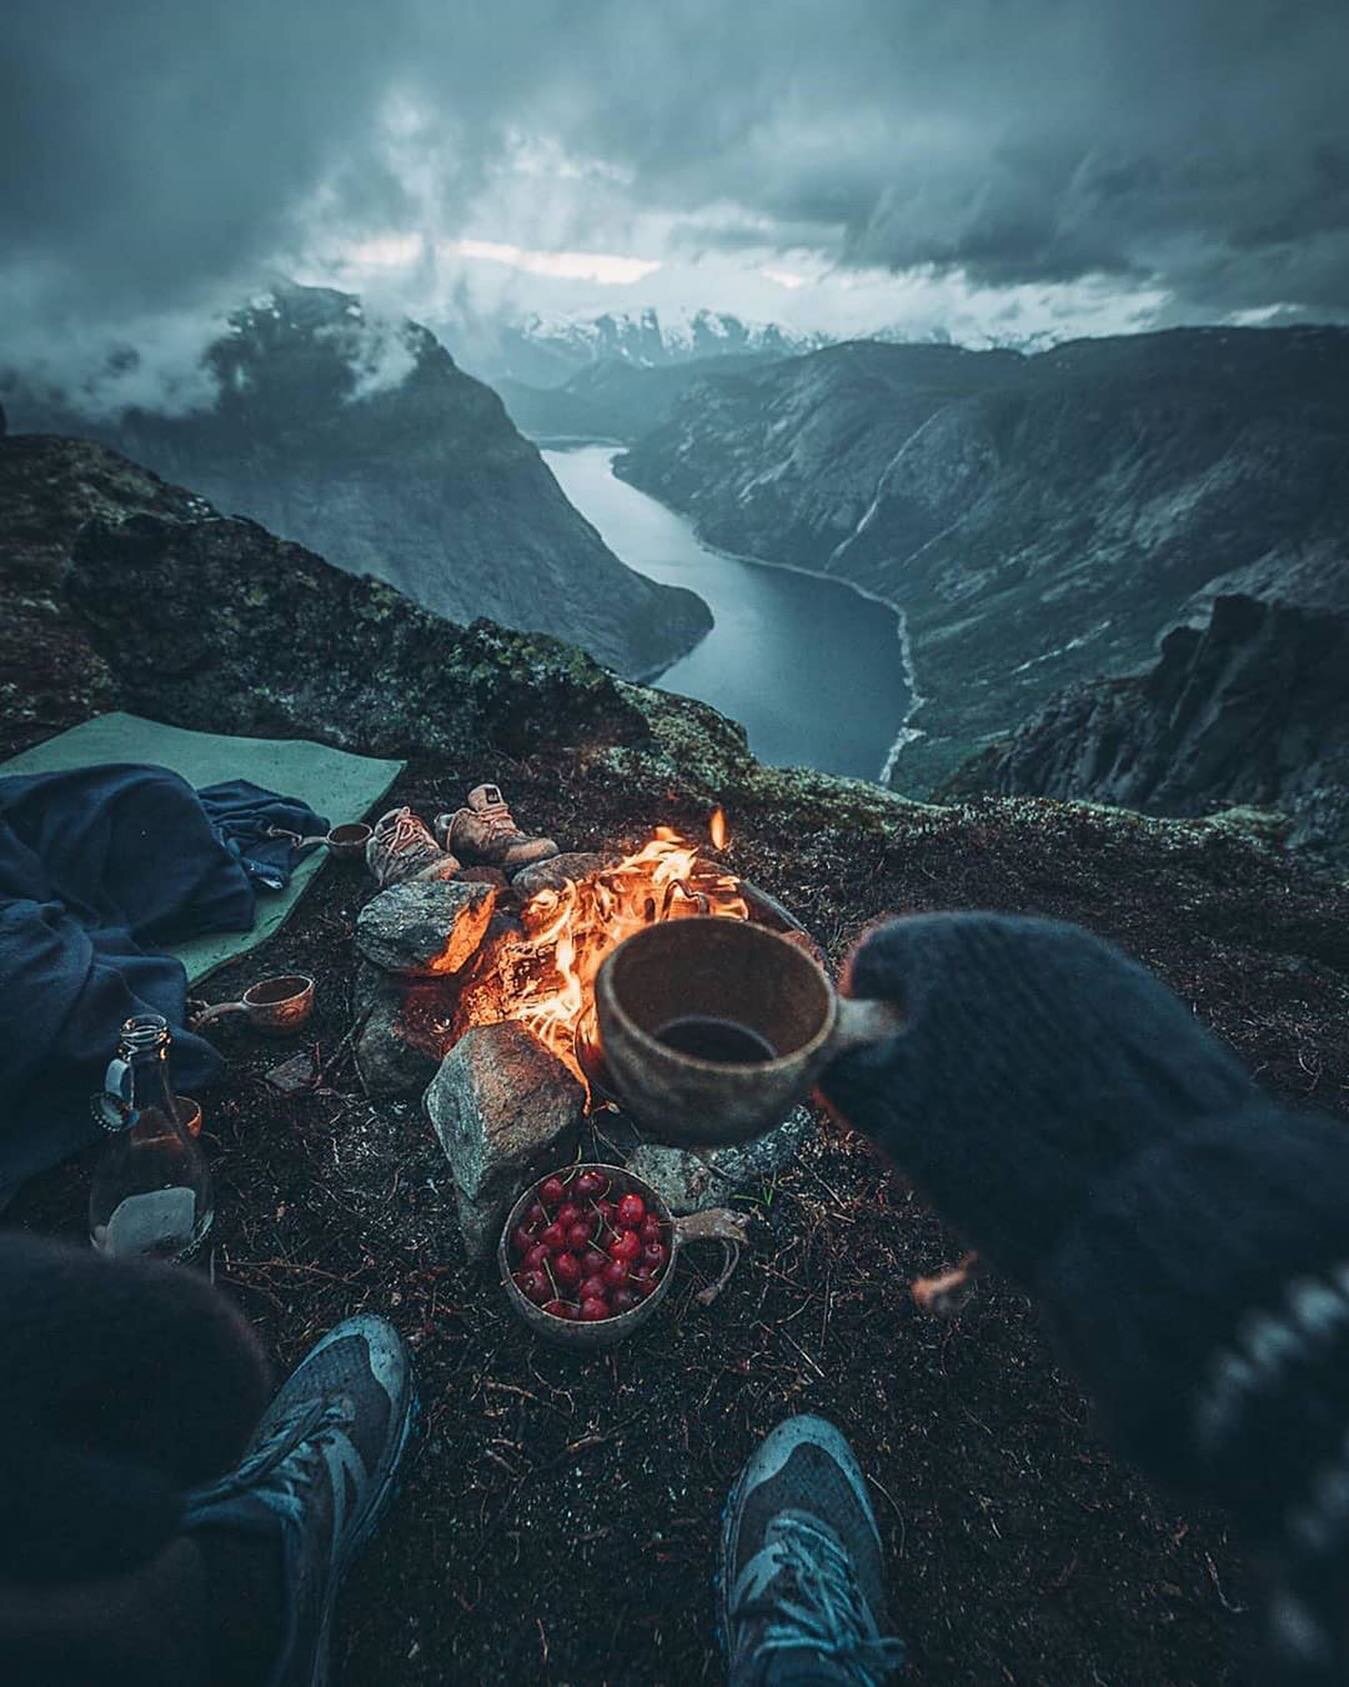 How about a picnic on a mountaintop?
Trolltunga in Norway sure have some incredible views!🏔😍
Mood by @christiantrustrup 📸